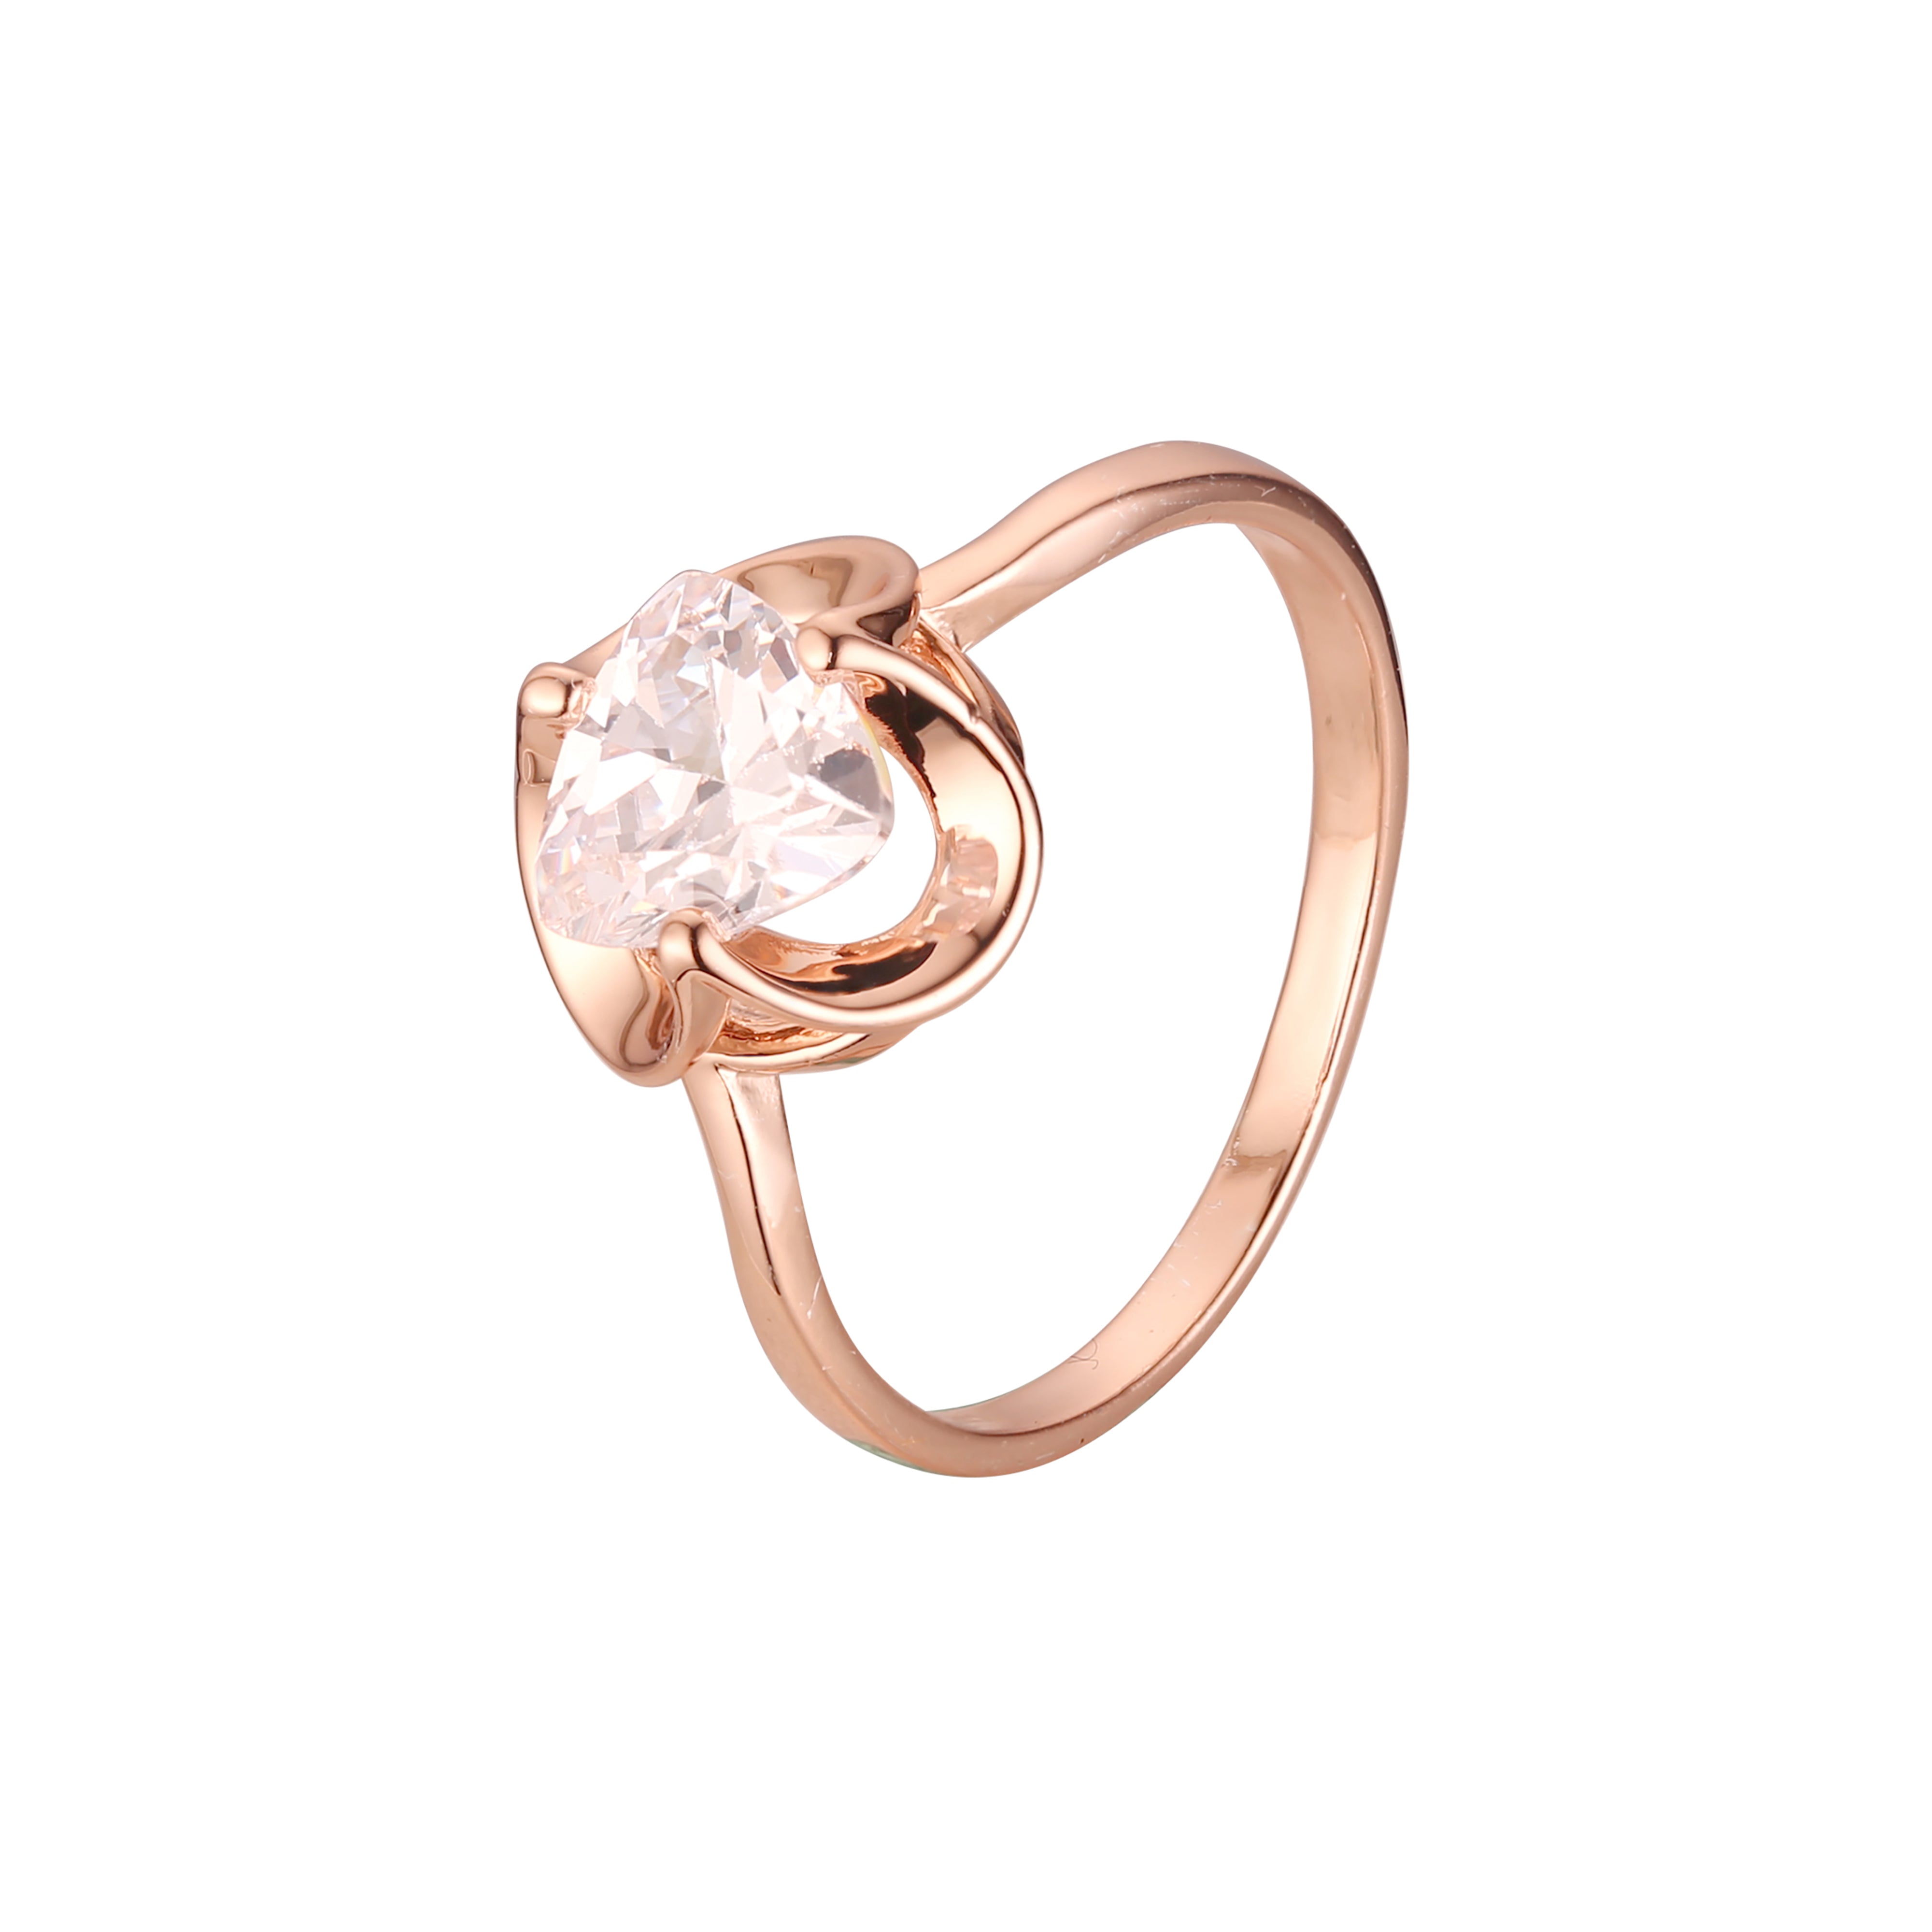 Solitaire triangle stone rings in 14K Gold, Rose Gold plating colors